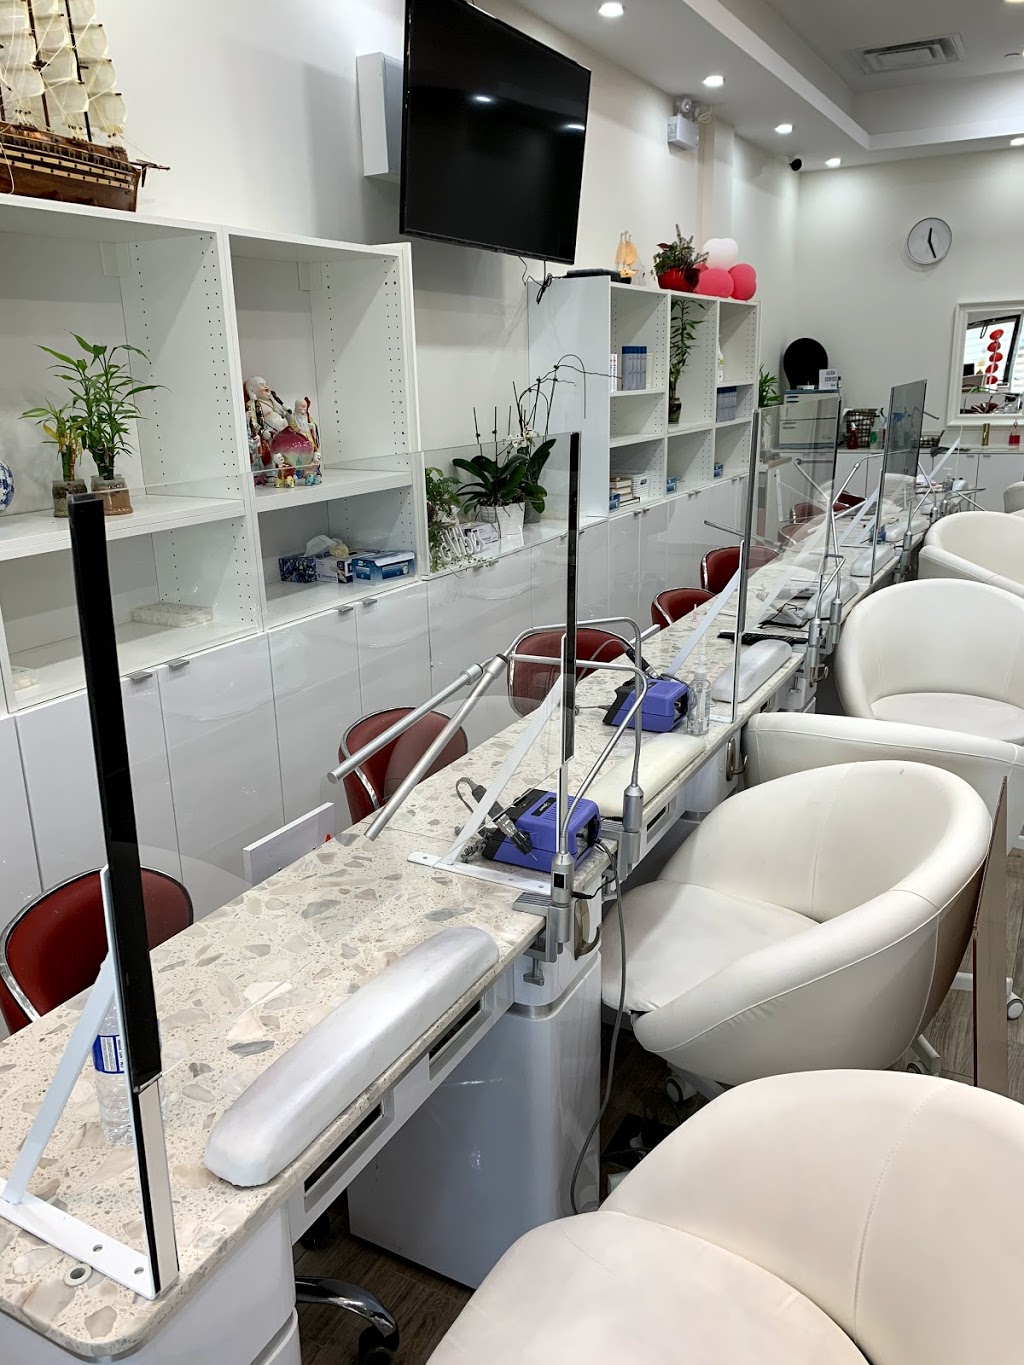 Pedi N Nails Riverview | hair care | 5 Montpelier St, Brampton, ON L6Y 0C3, Canada | 9054535000 OR +1 905-453-5000